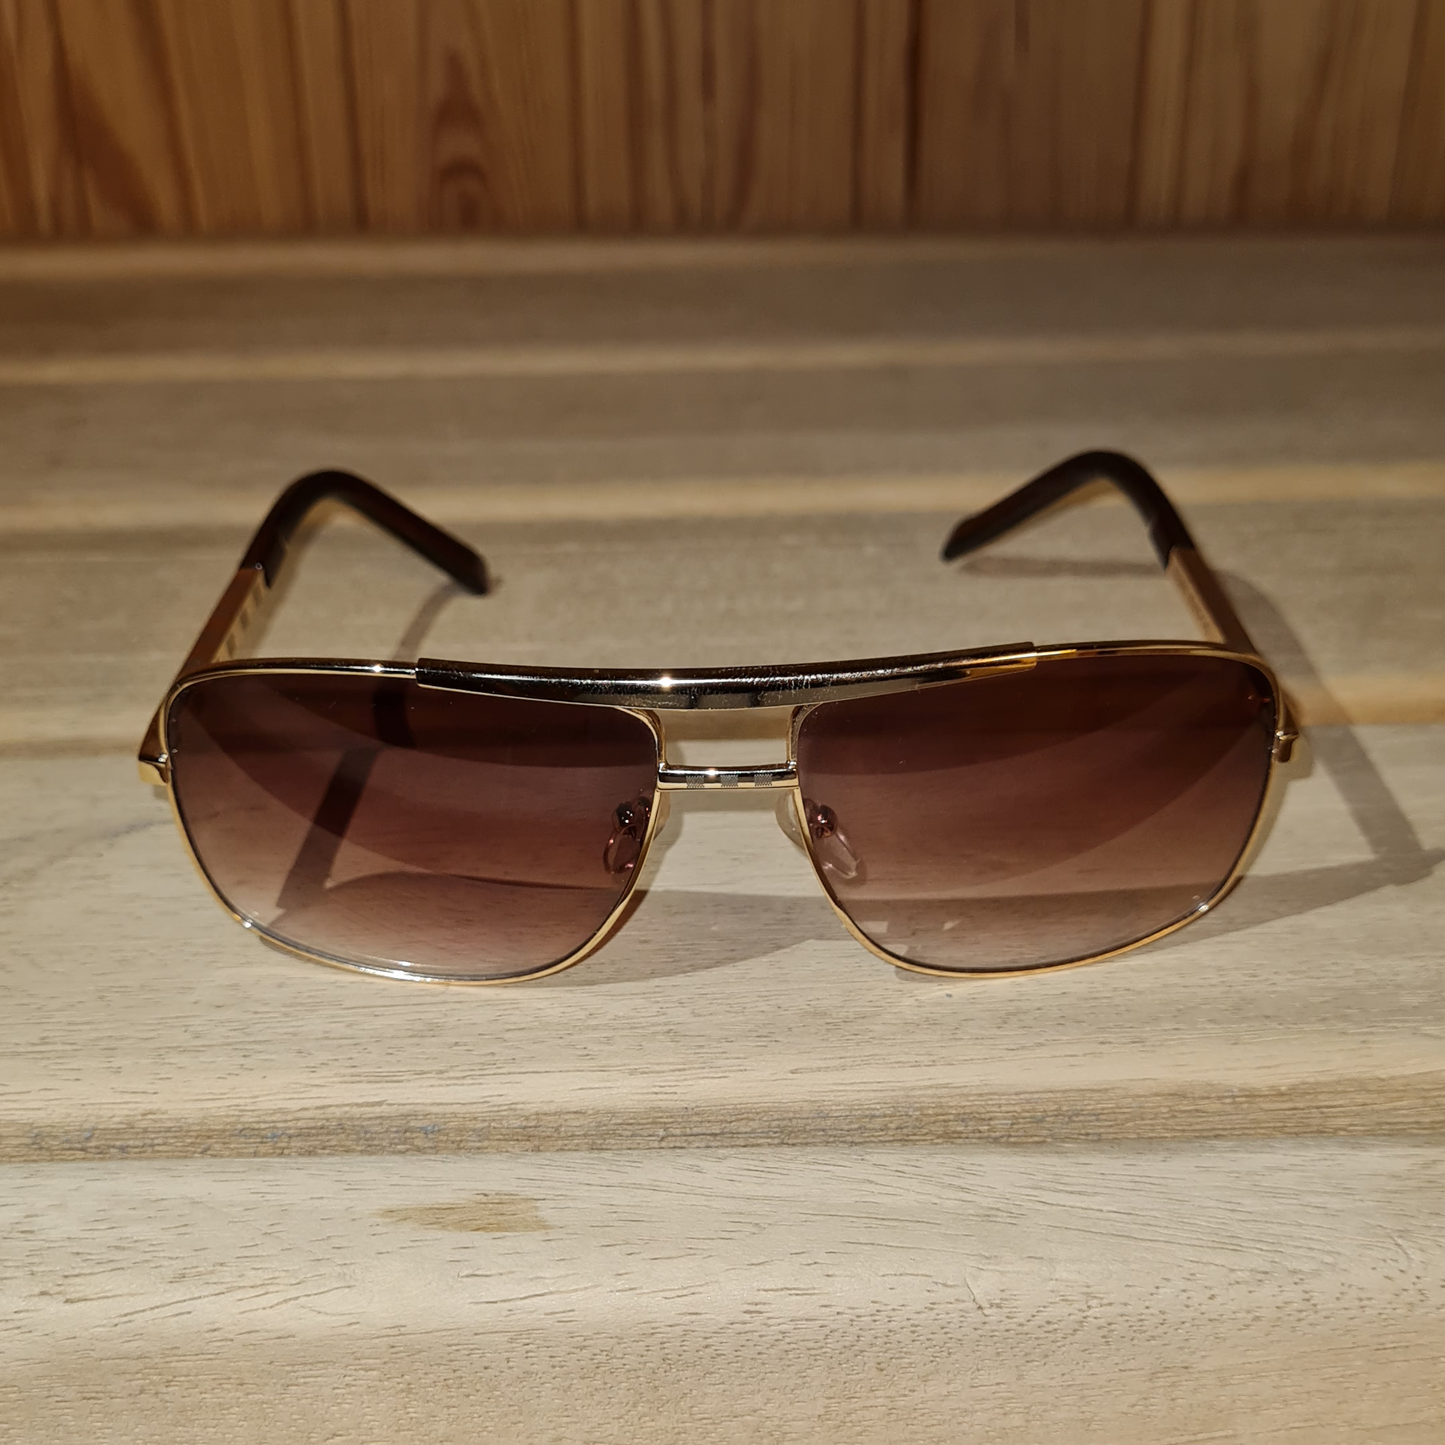 Andrew Tate Sunglasses Gold/Brown | Andrew Tate Sunglasses | Tate Sunglasses